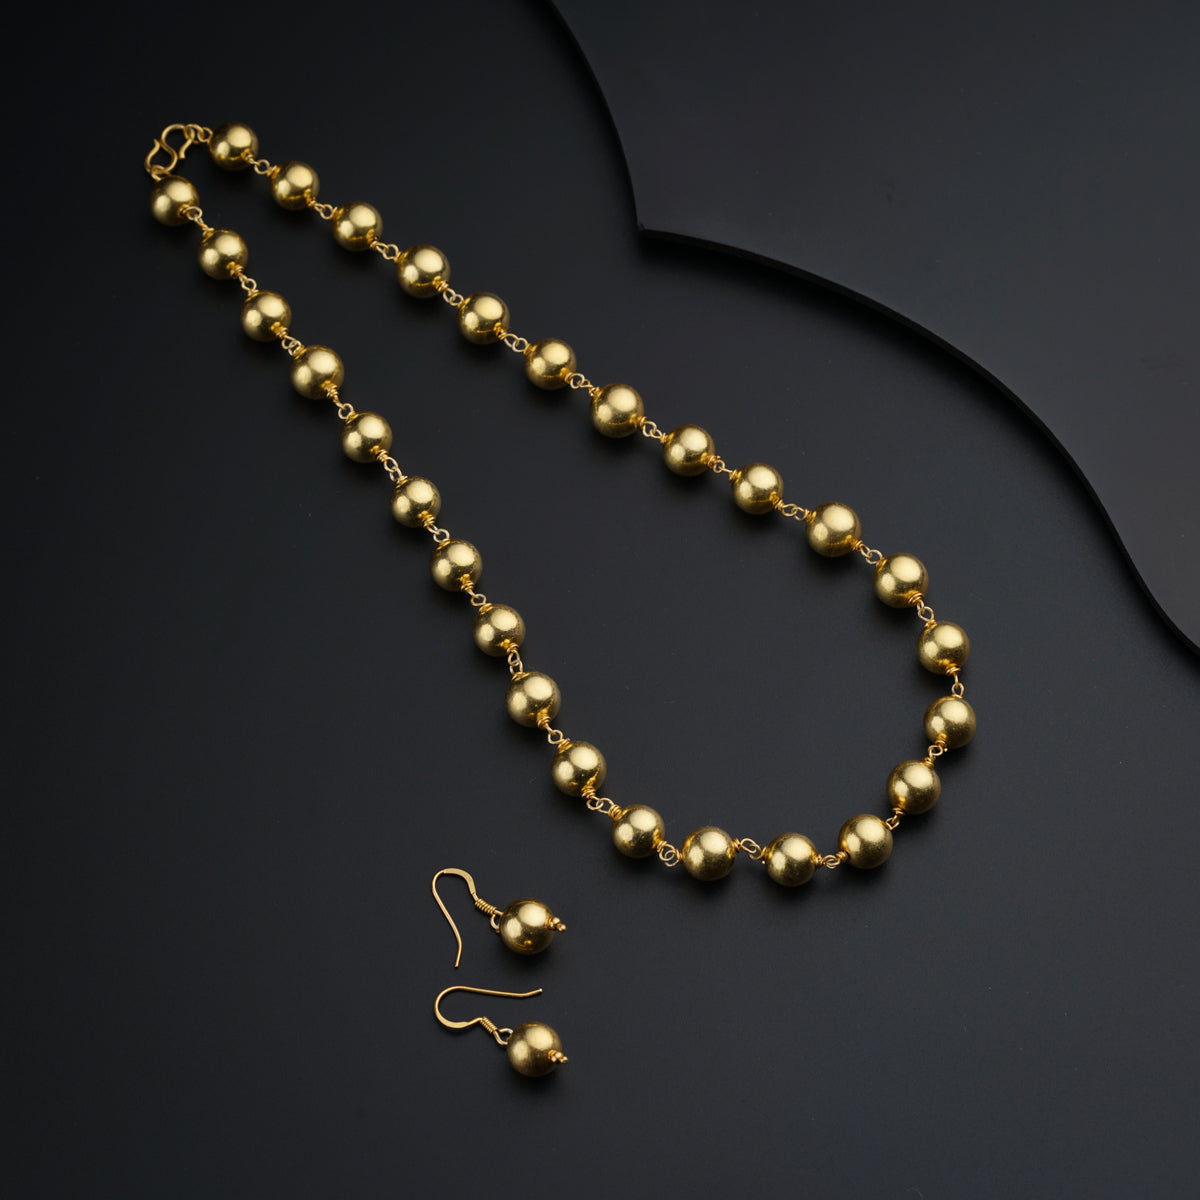 a gold beaded necklace on a black surface